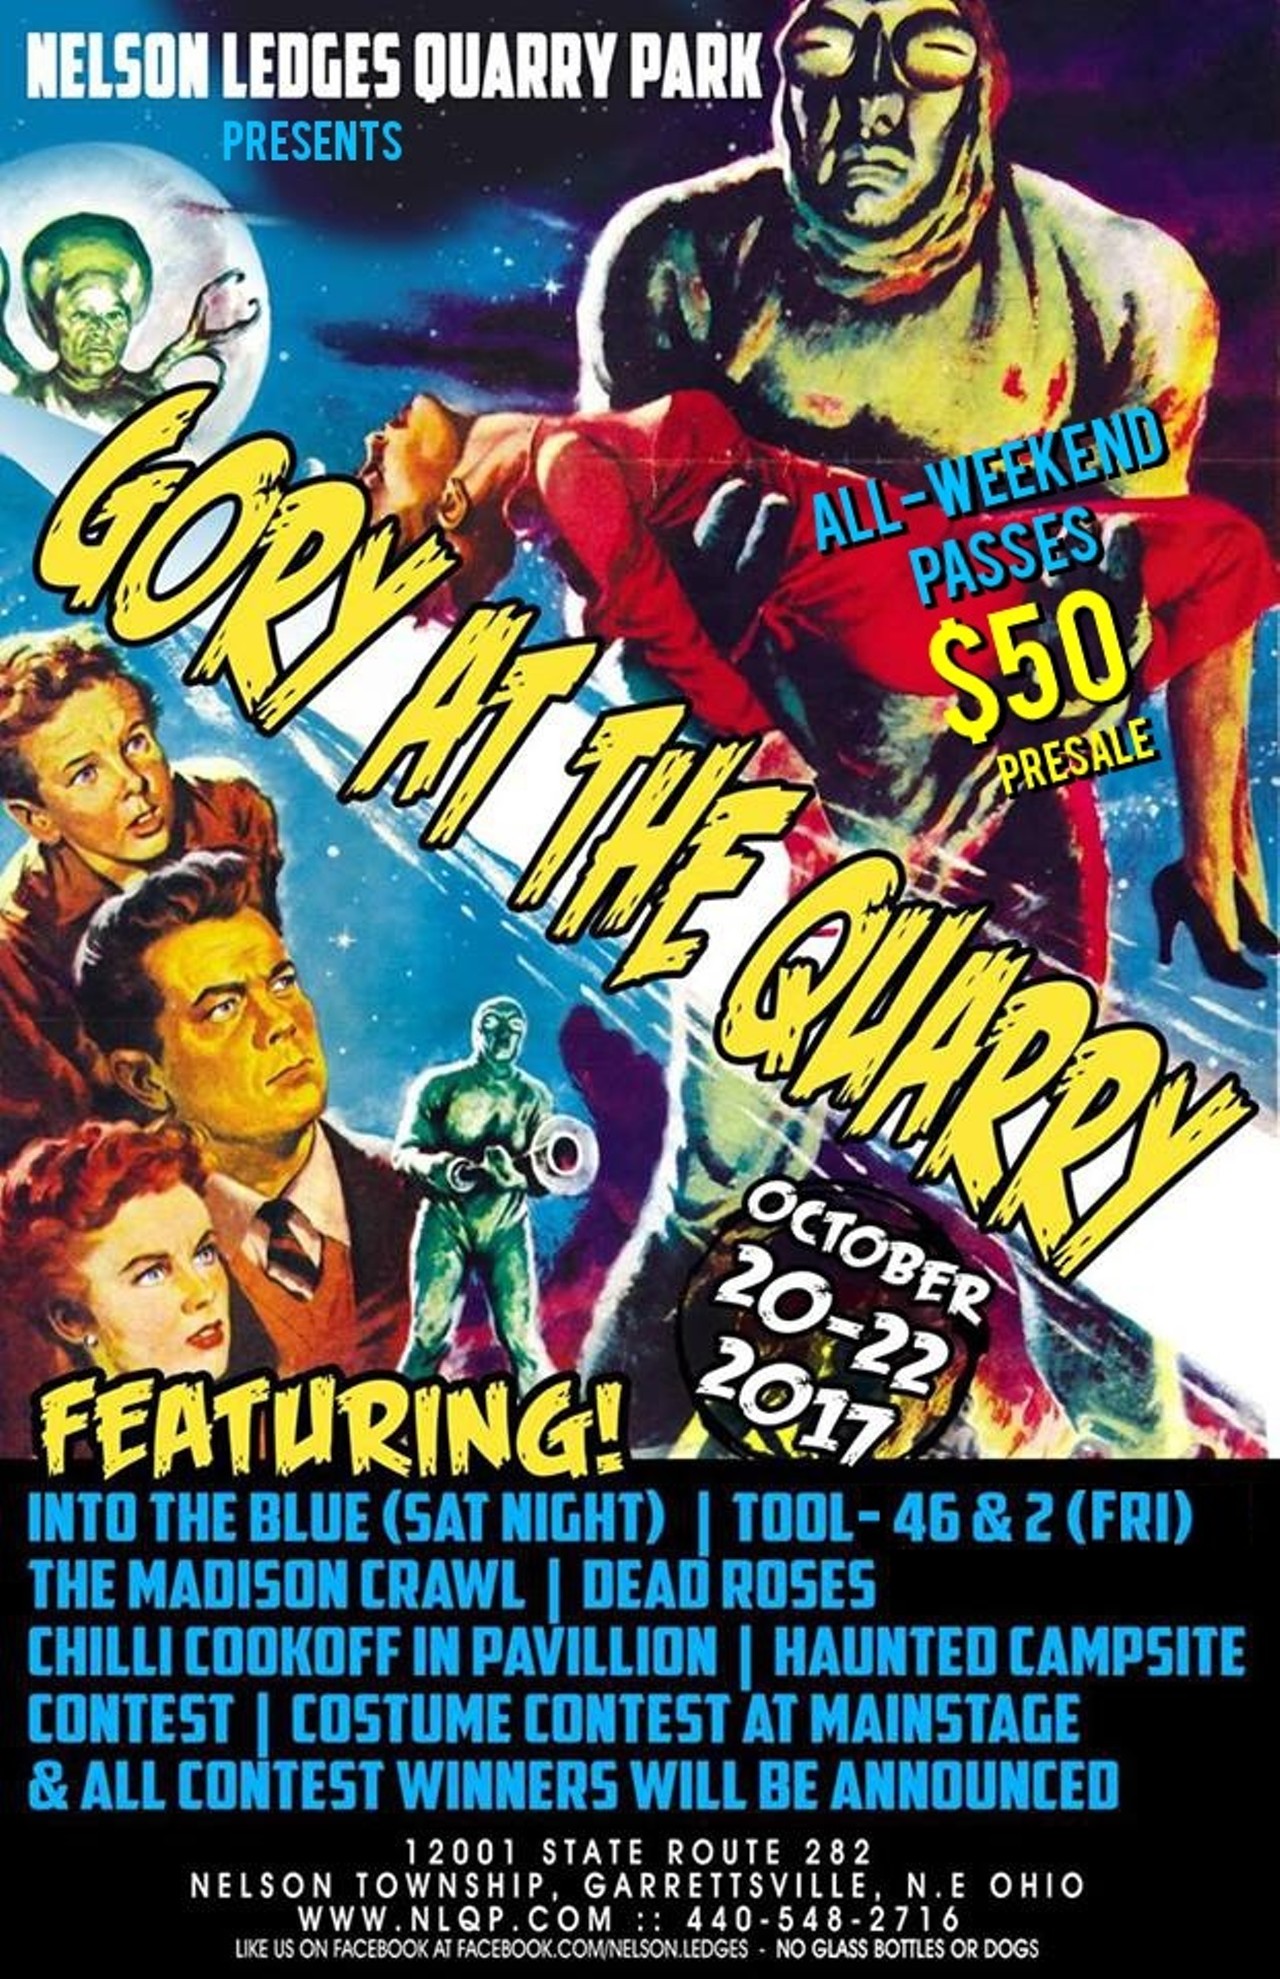  Gory at the Quarry
Fri, Oct. 20
Poster art Provided